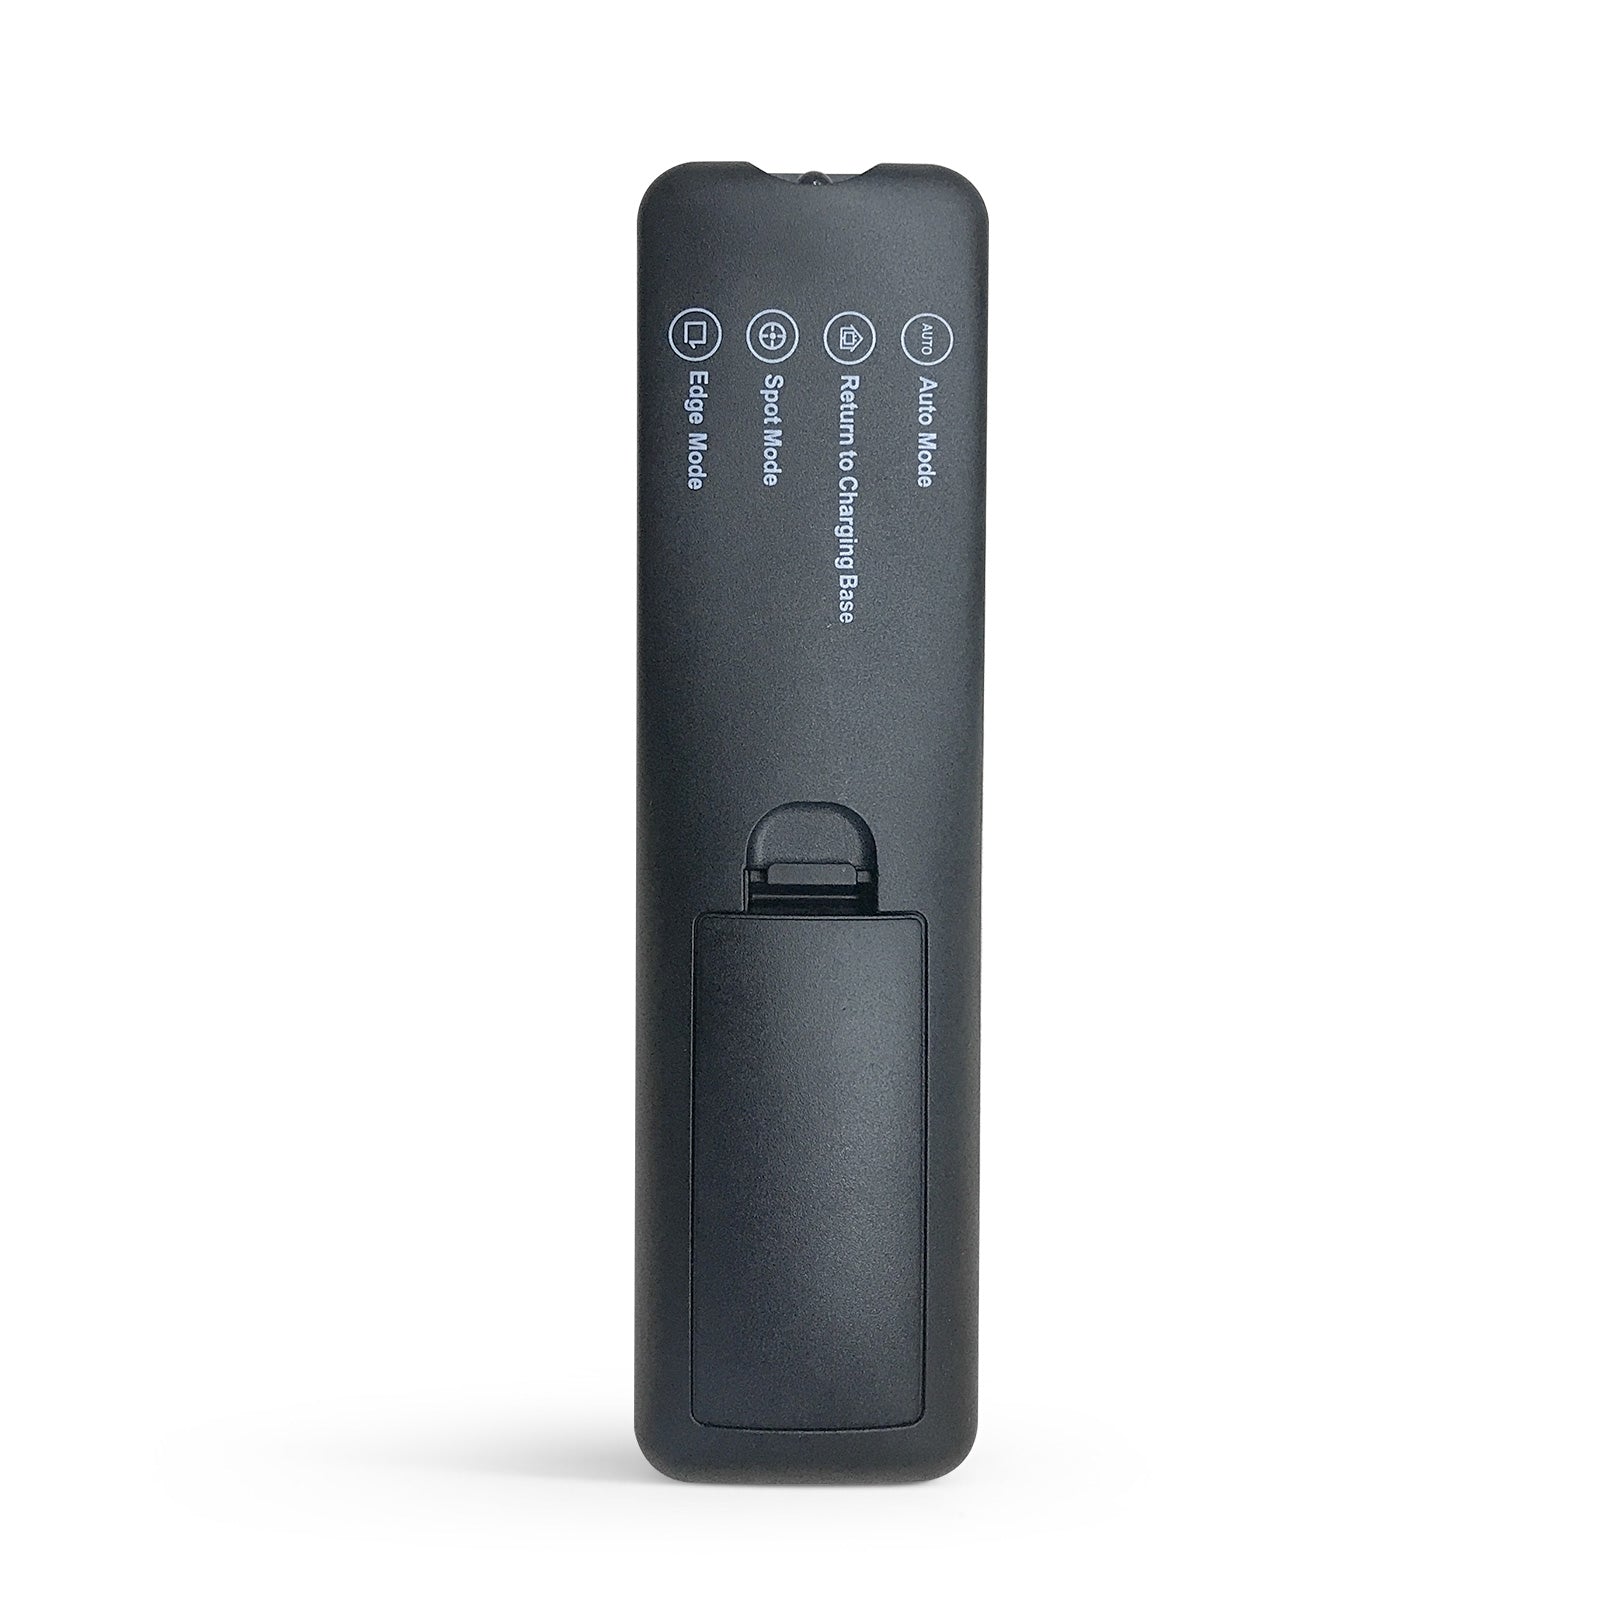 Remote Control for Thamtu G10/G10S/G10H/G11 (Without AAA Battery)